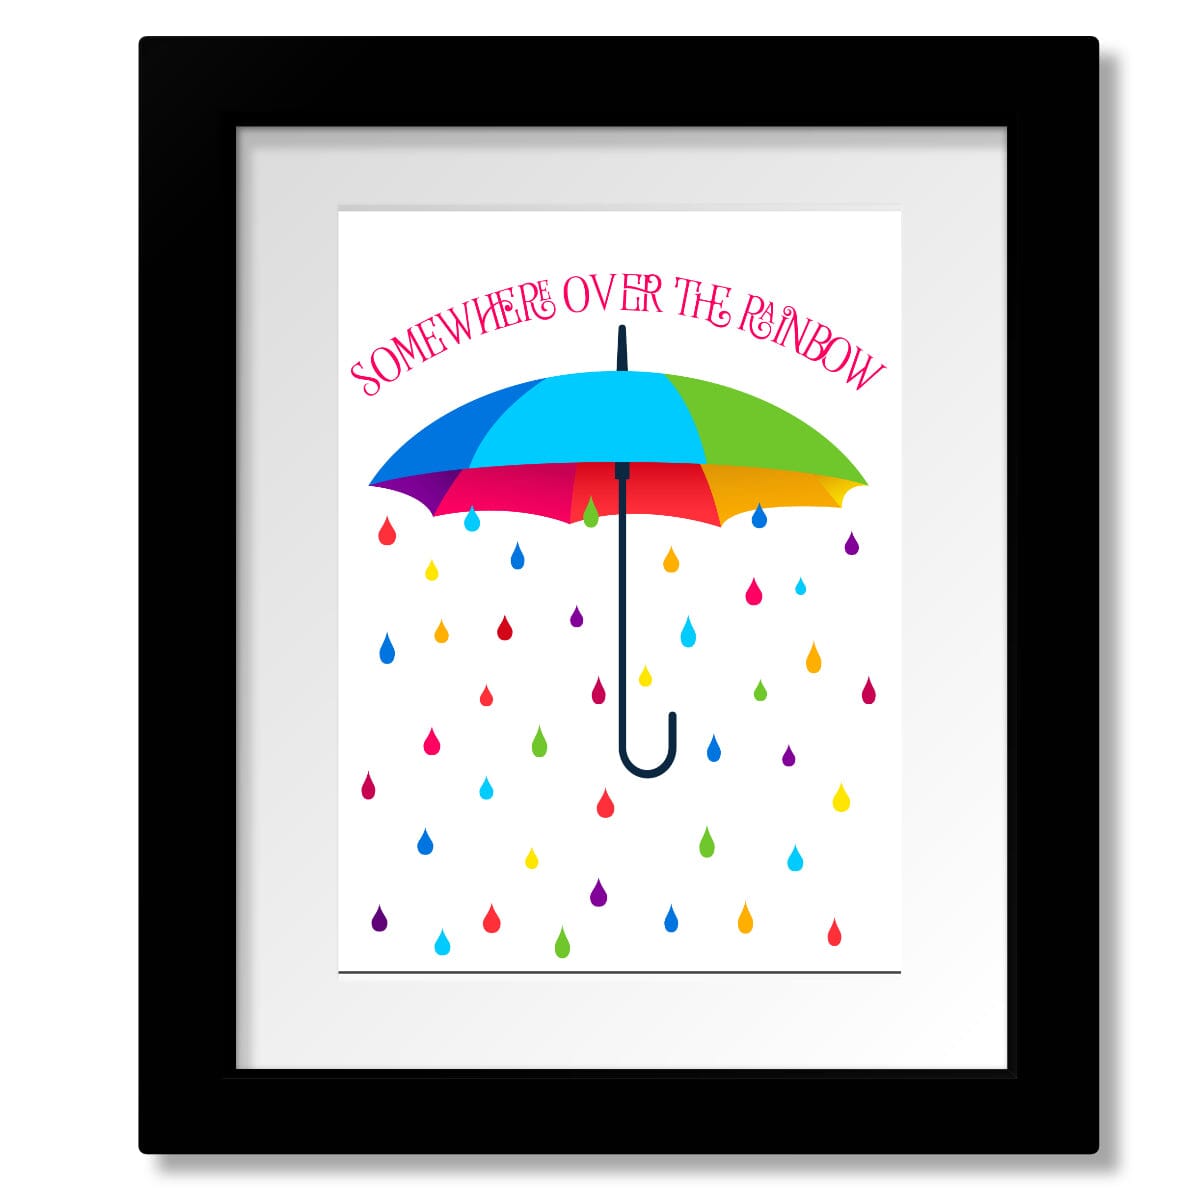 Somewhere Over the Rainbow from Wizard of Oz Art Print Song Lyrics Art Song Lyrics Art 8x10 Matted and Framed Print 